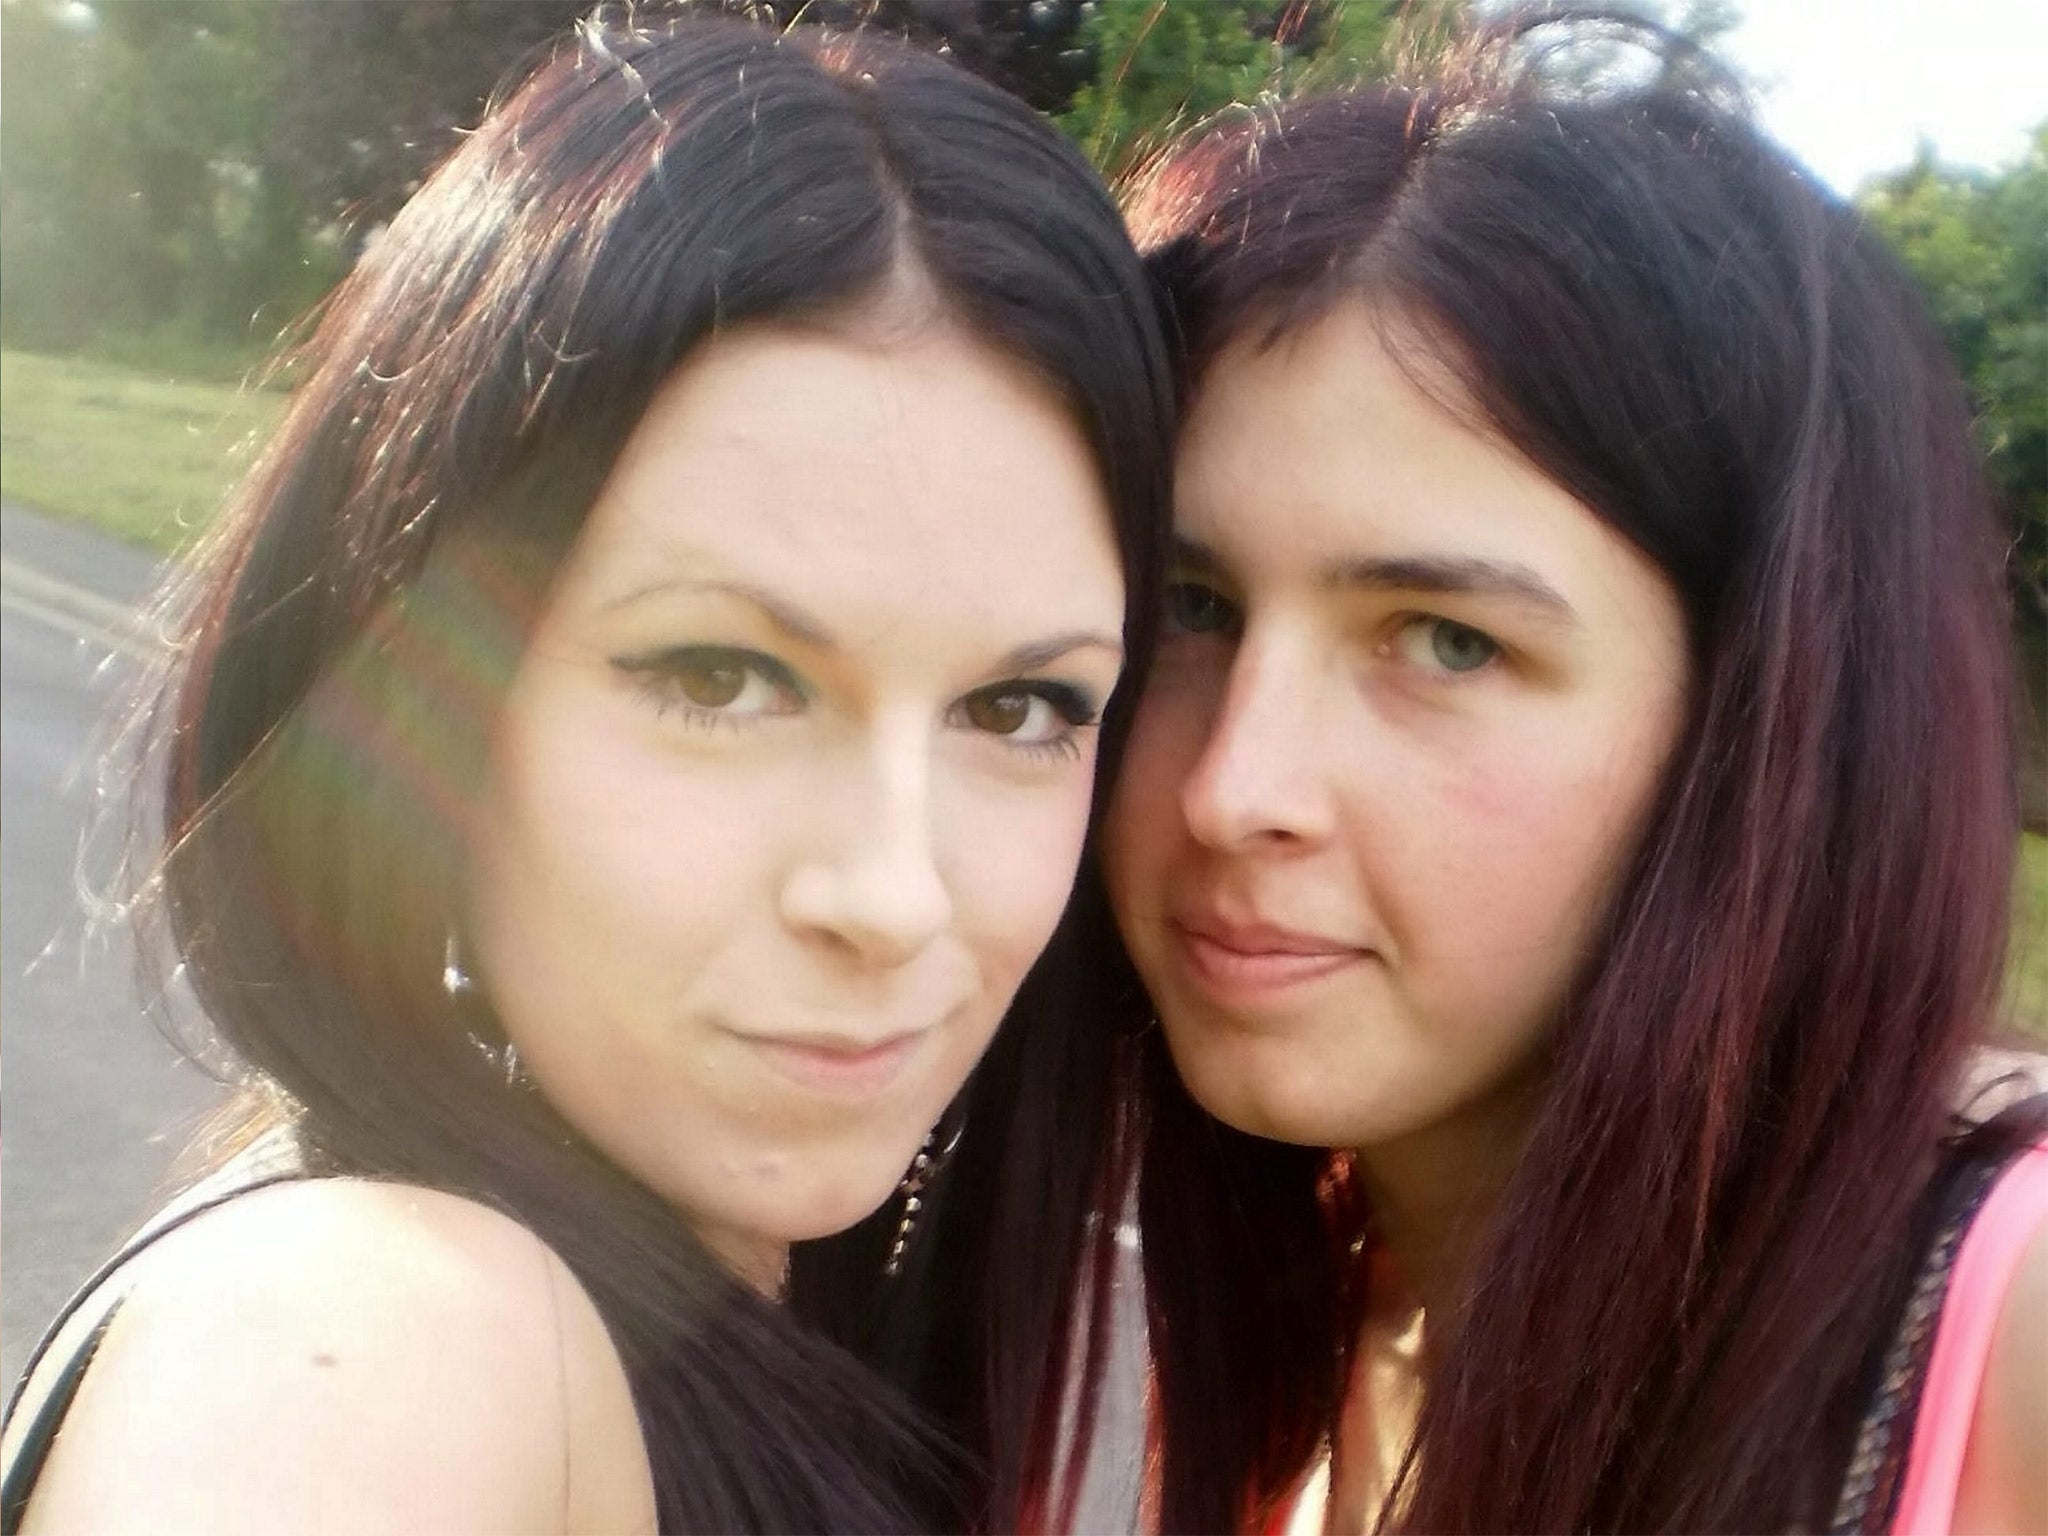 Woman supplied gas to help best friend commit suicide, court hears ...